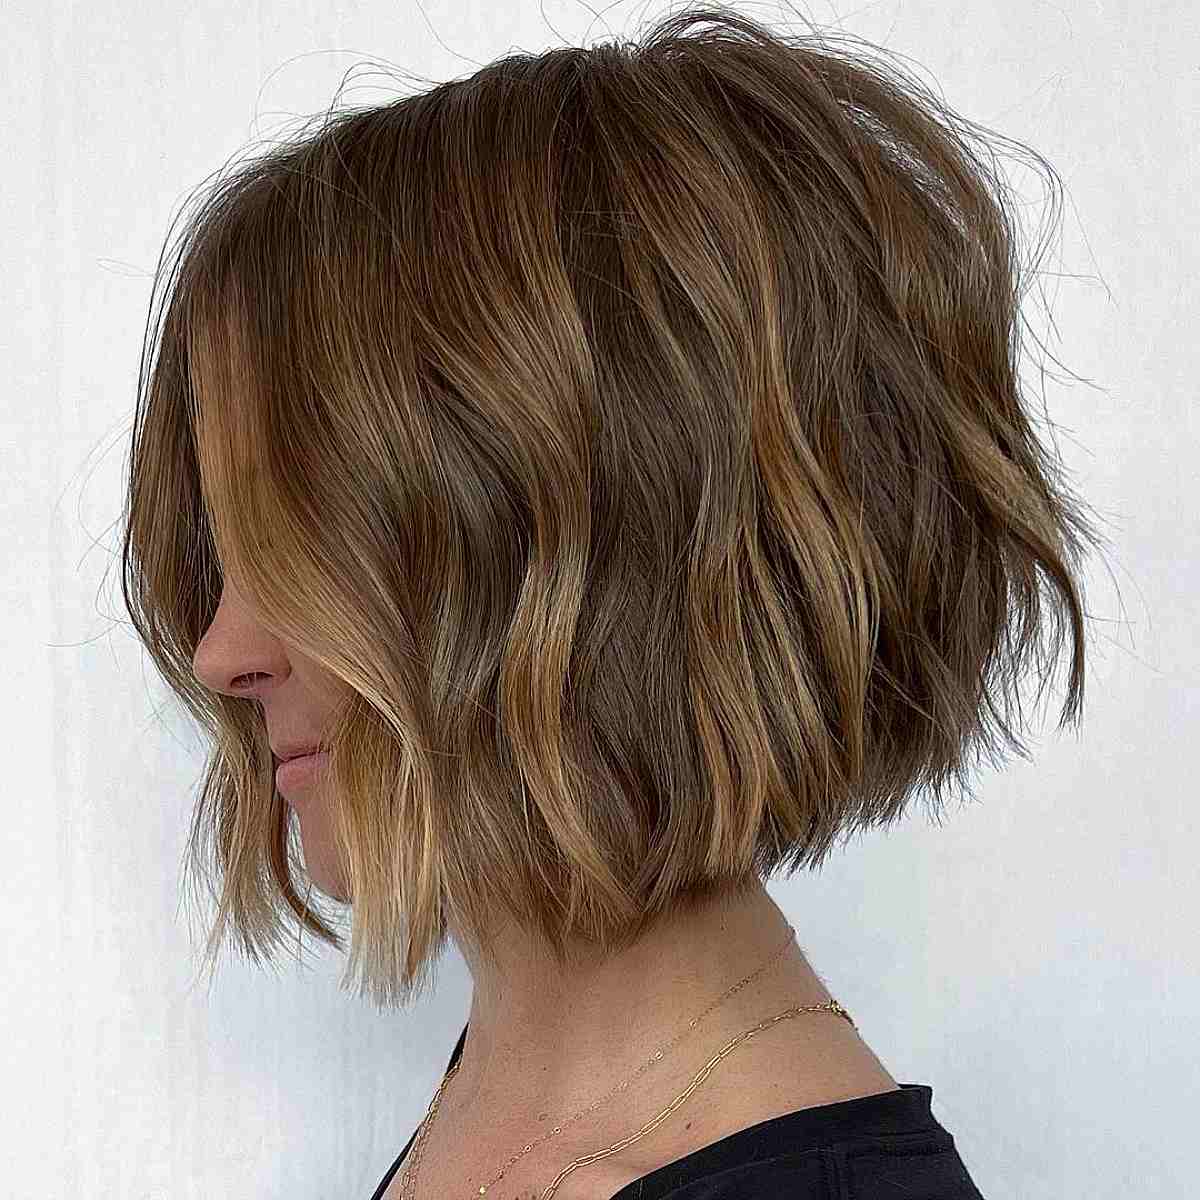 Chin-Length Short Bobbed Hair with Soft Textured Waves